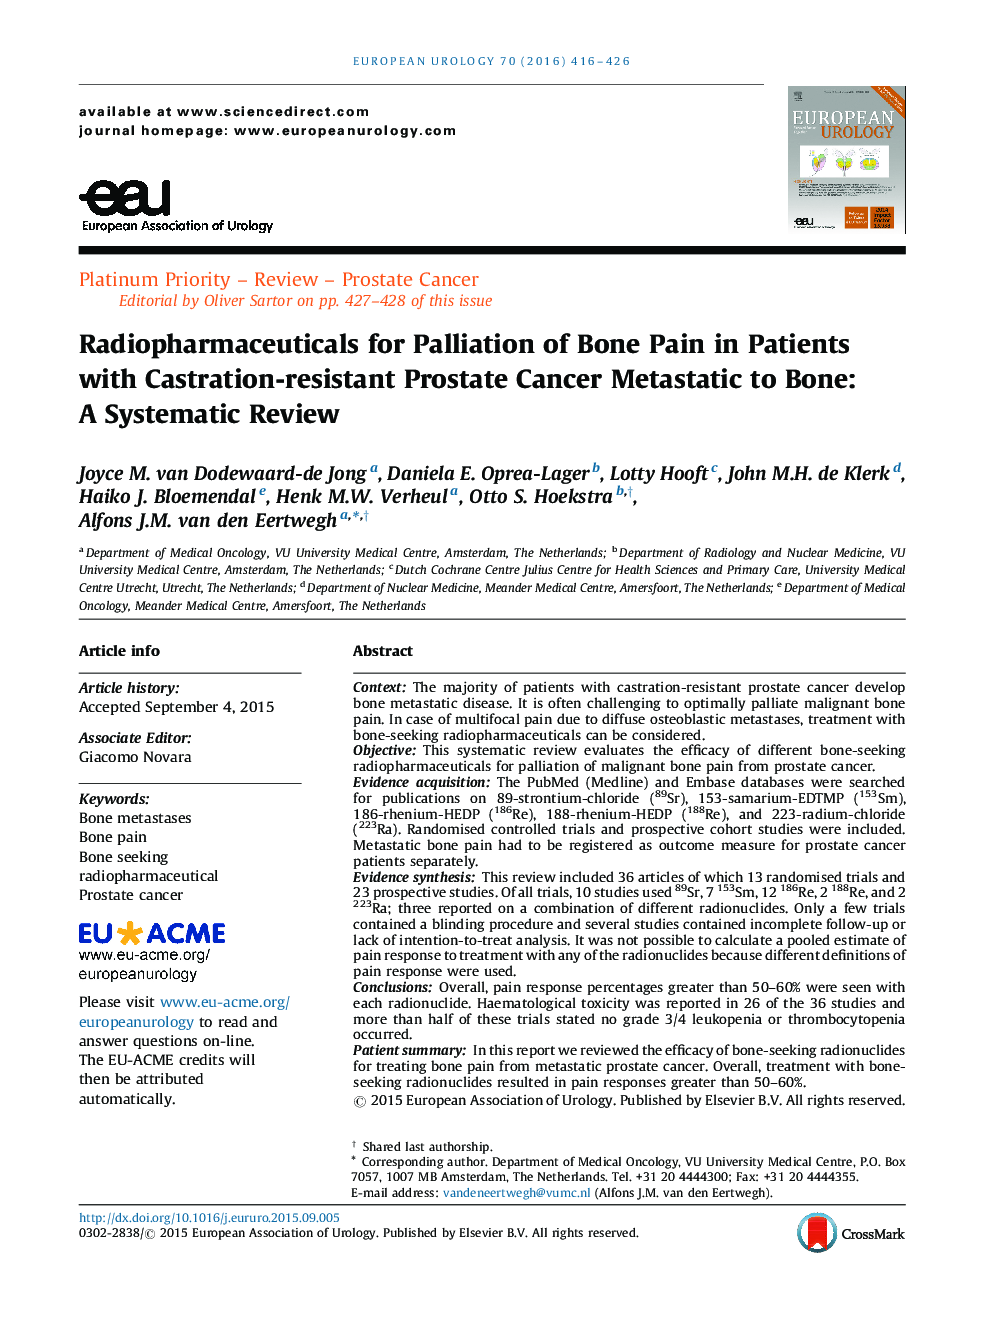 Radiopharmaceuticals for Palliation of Bone Pain in Patients with Castration-resistant Prostate Cancer Metastatic to Bone: A Systematic Review